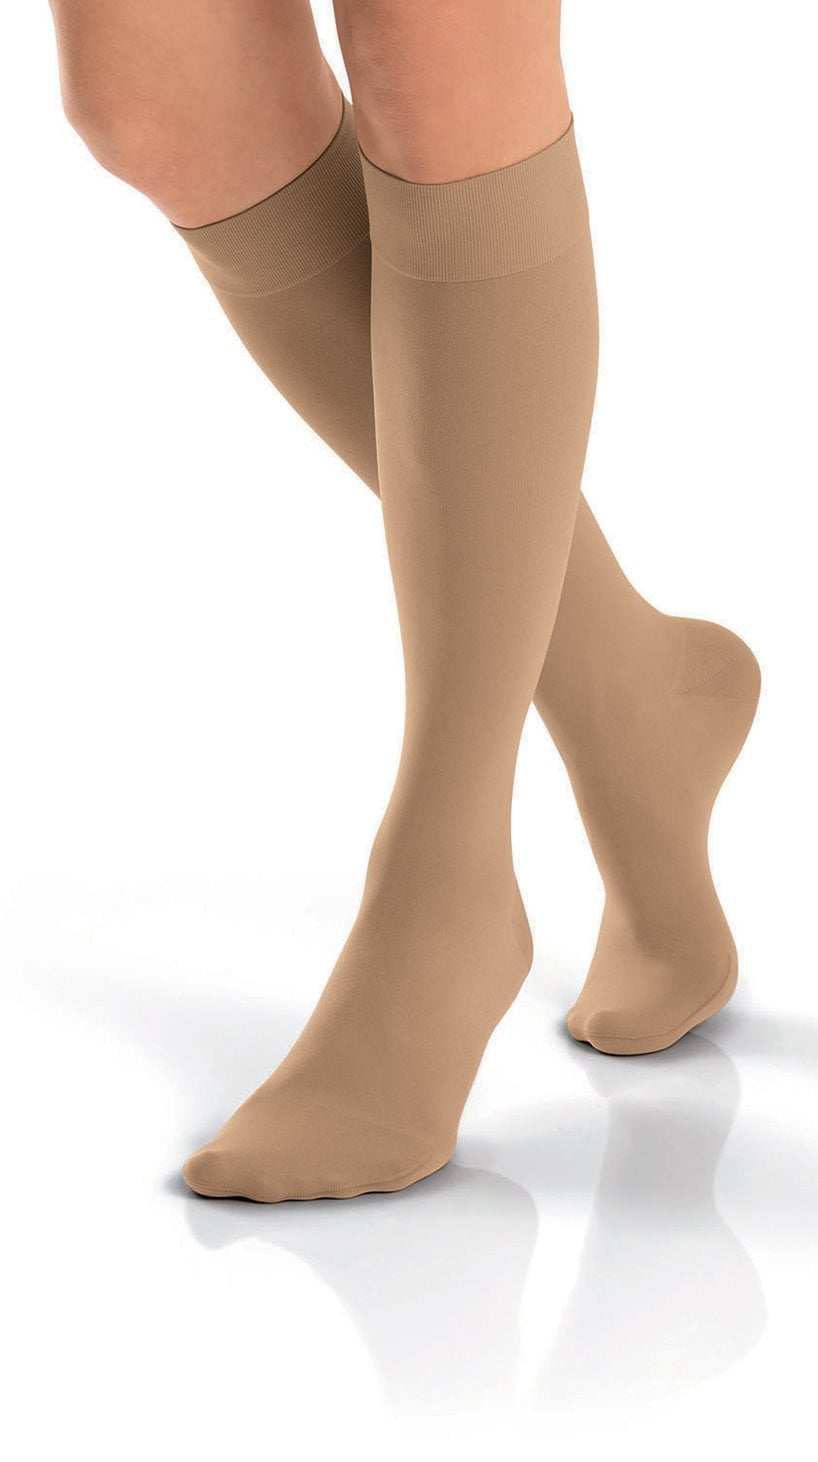 What are jobst fast fit compression stockings